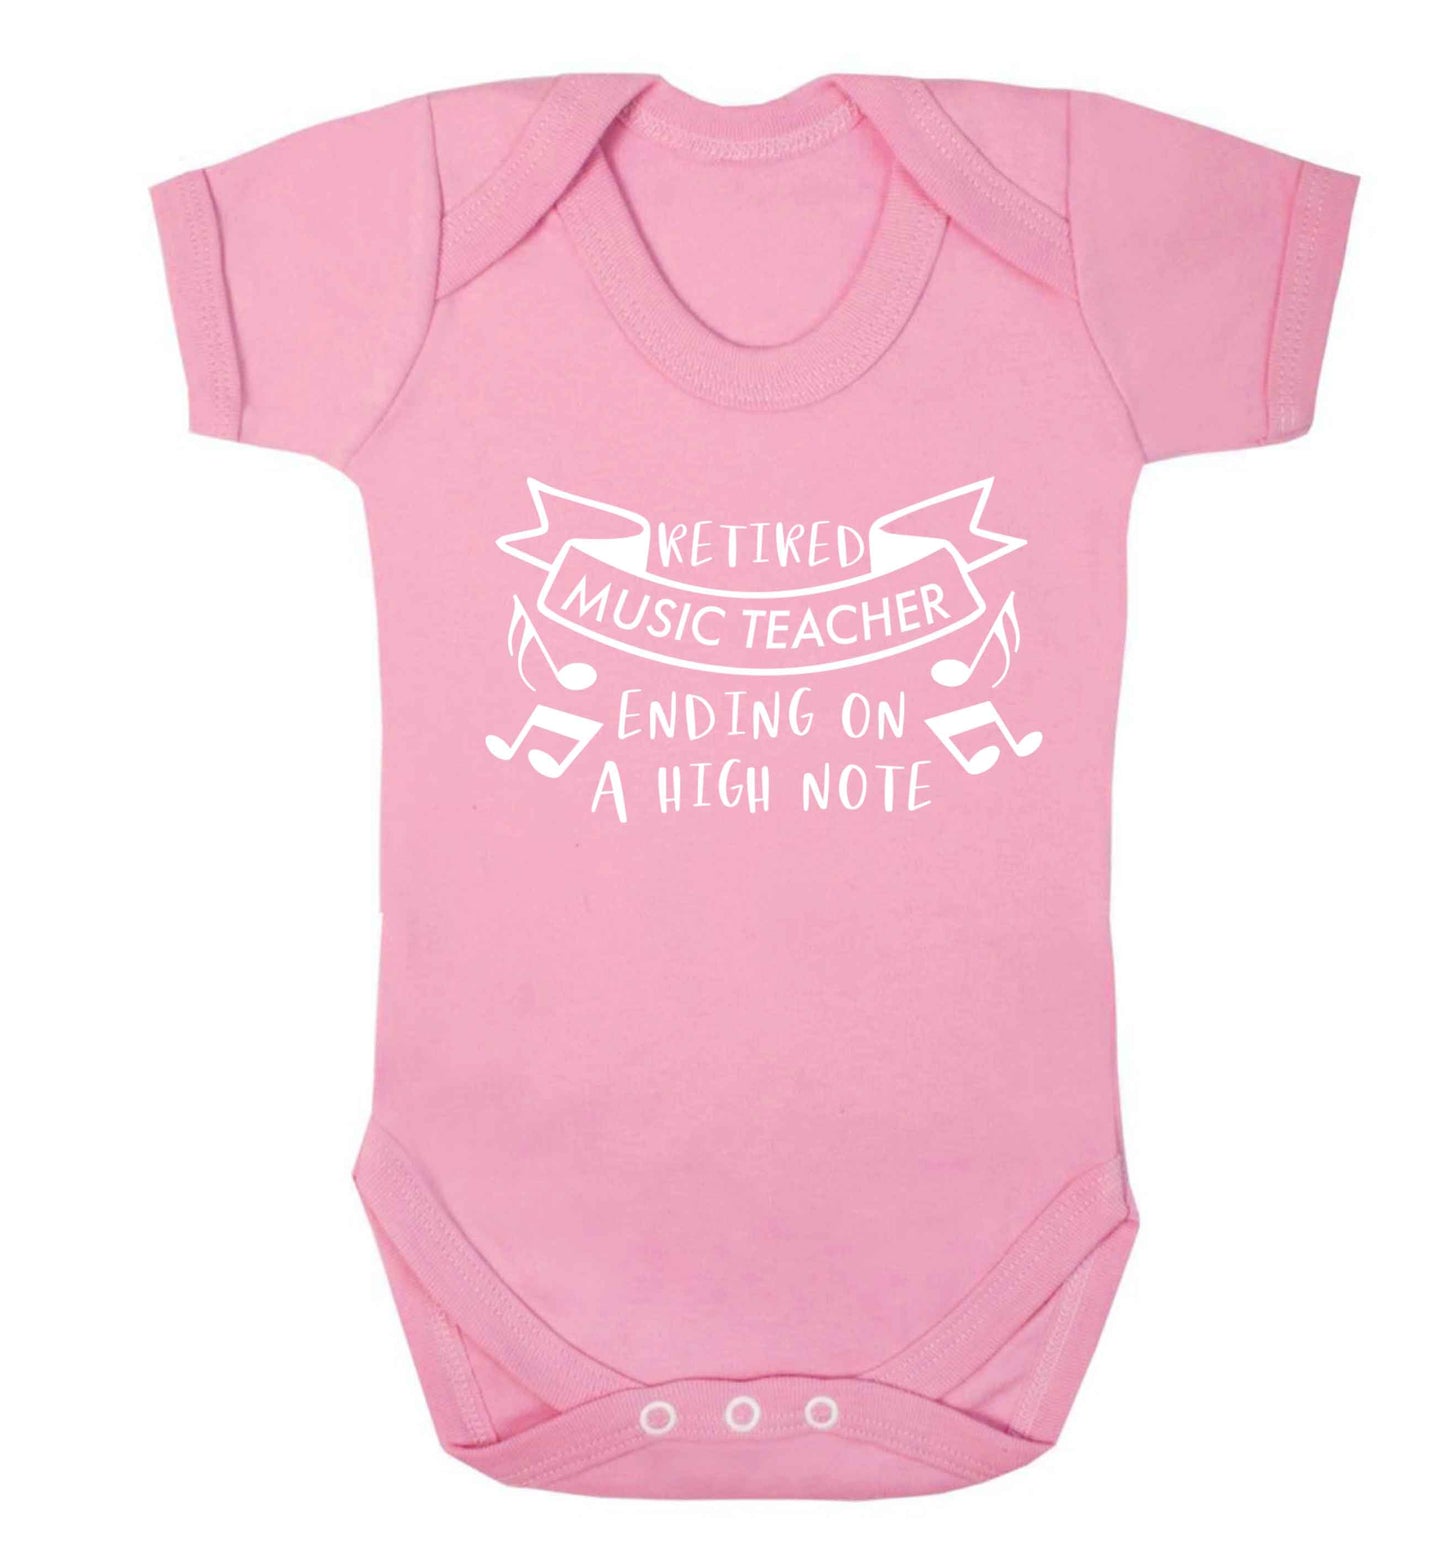 Retired music teacher ending on a high note Baby Vest pale pink 18-24 months